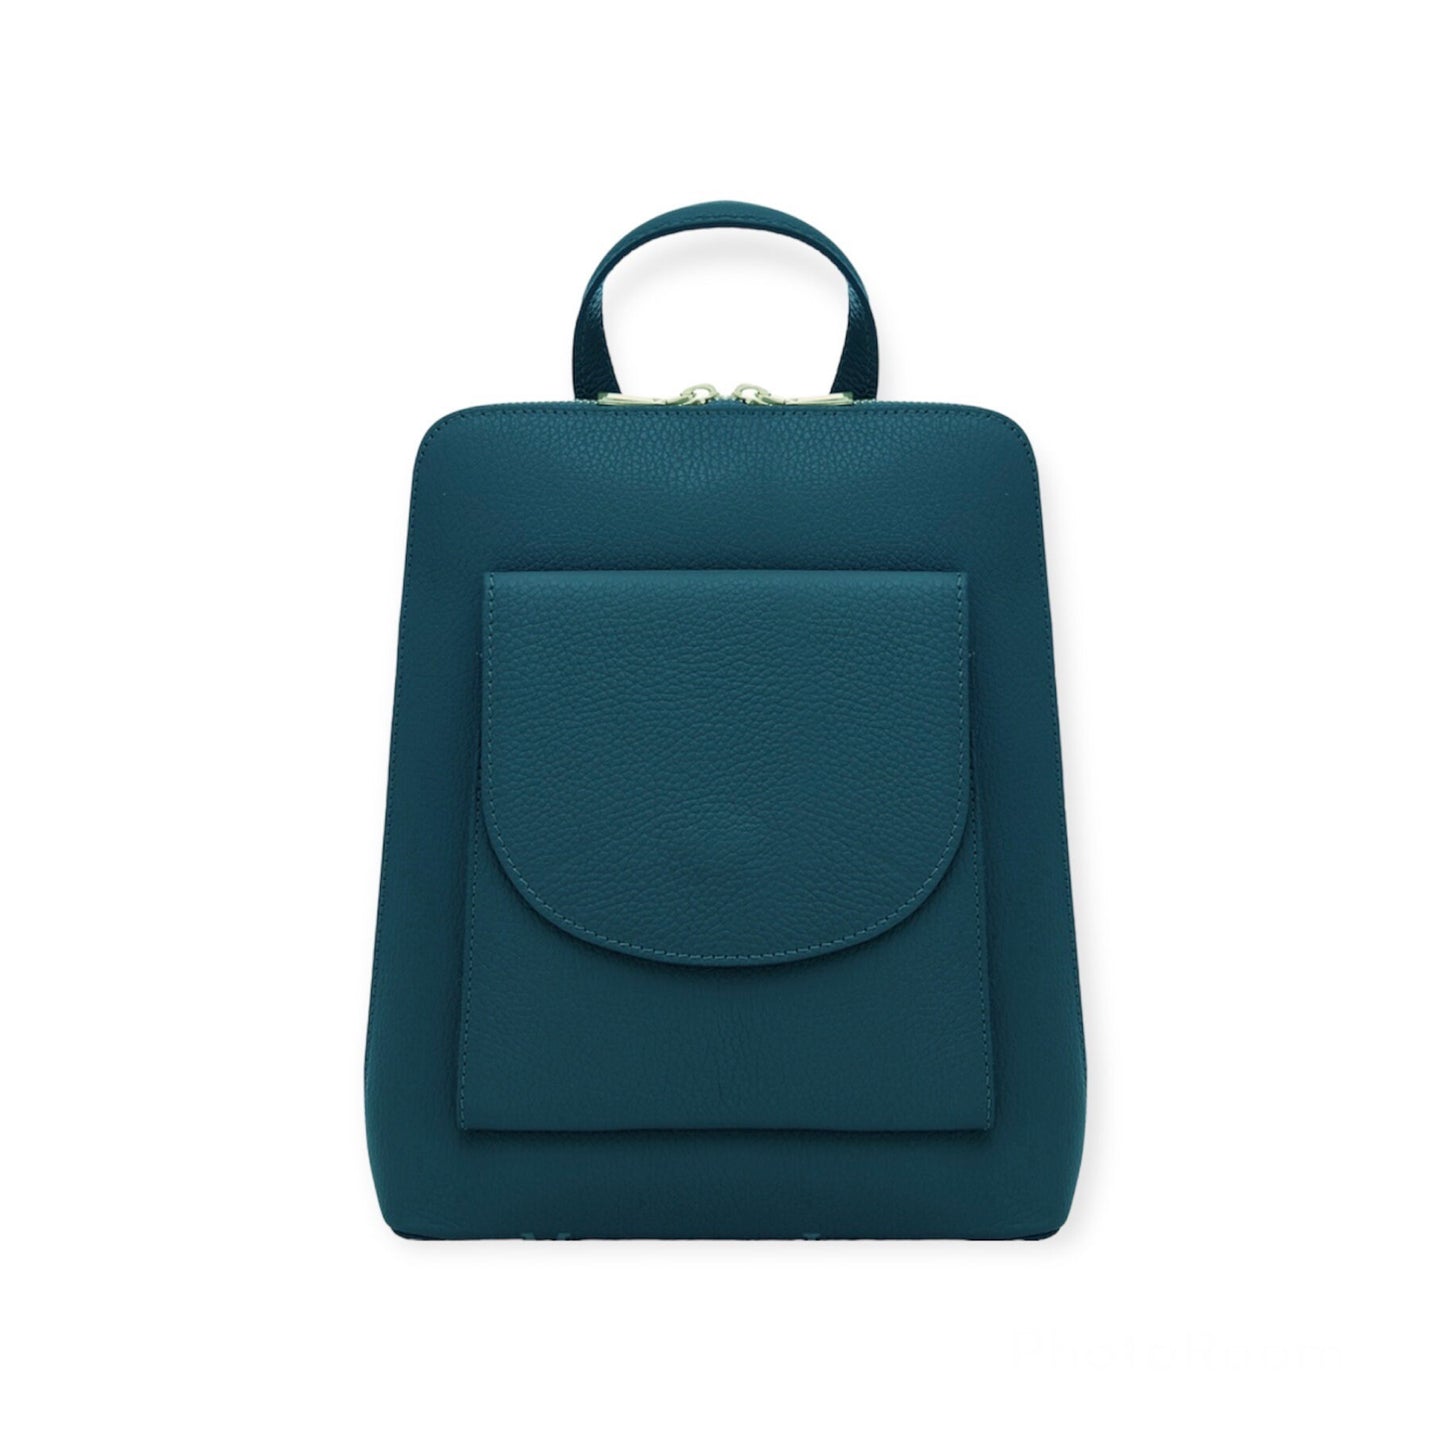 Teal Stylish Leather Backpack